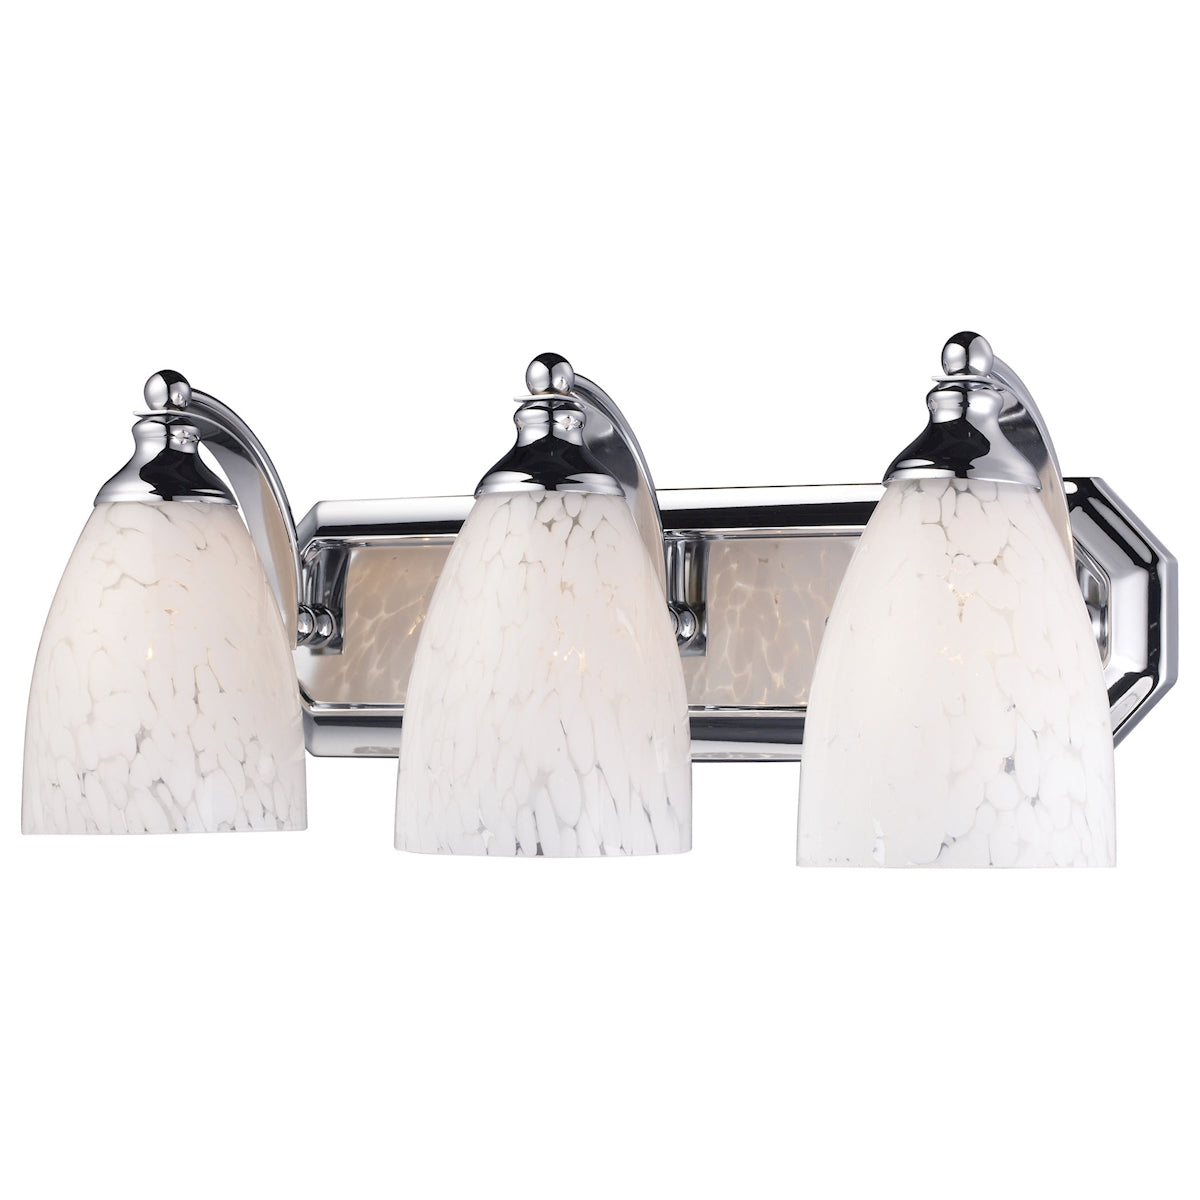 ELK Lighting 570-3C-SW Mix and Match Vanity 3-Light Wall Lamp in Chrome with Snow White Glass